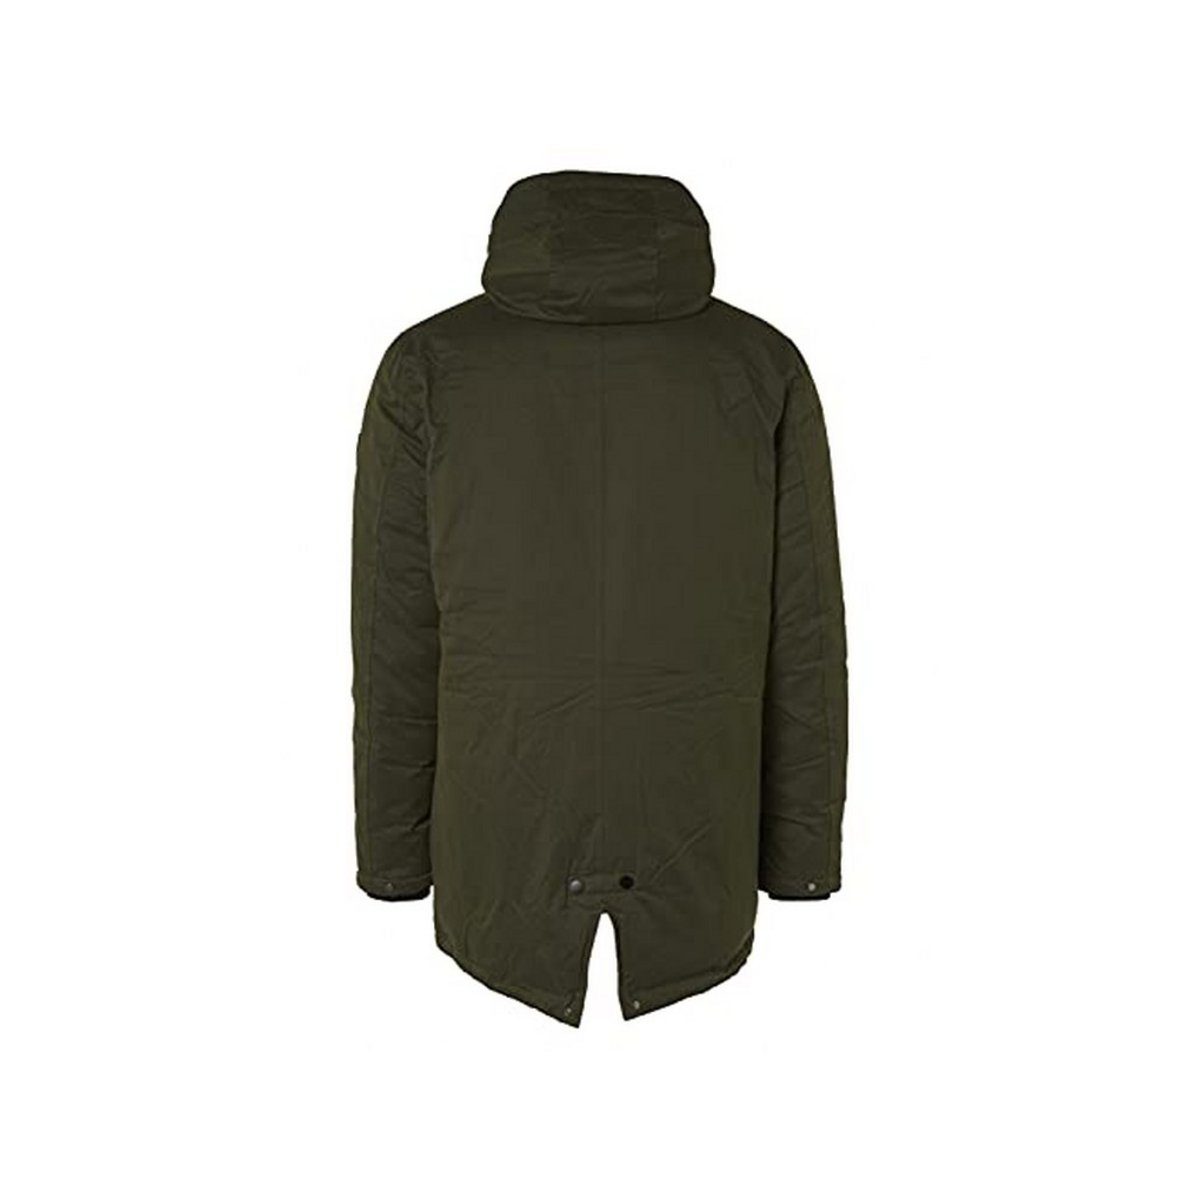 EXCESS NO (1-St) Anorak olive